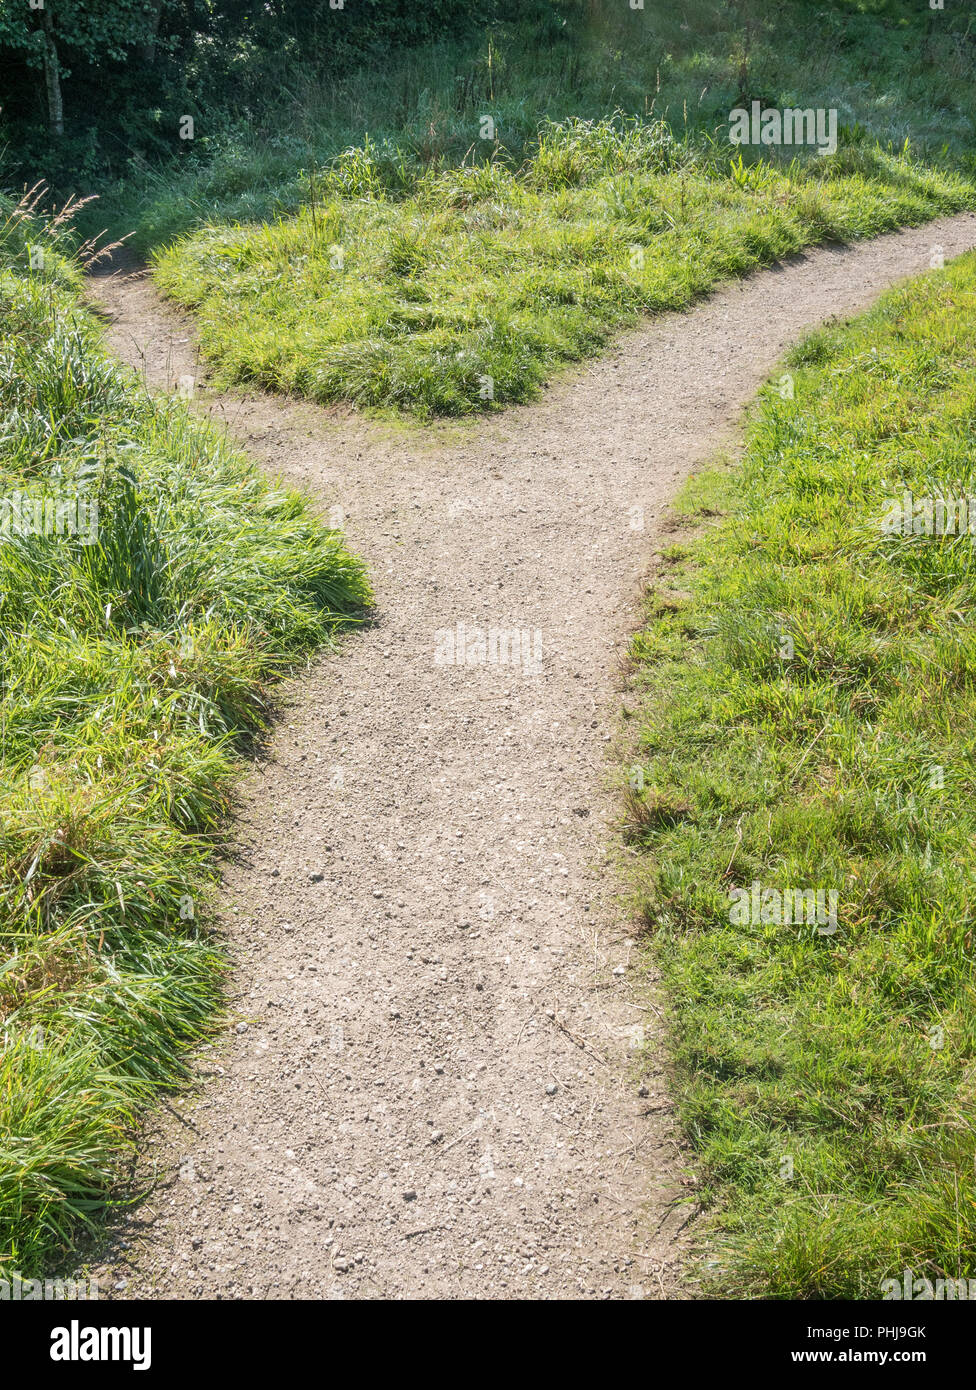 Small branching footpath - metaphor changing direction, diverging paths, alternative route, career path change, splitting up, going separate ways. Stock Photo